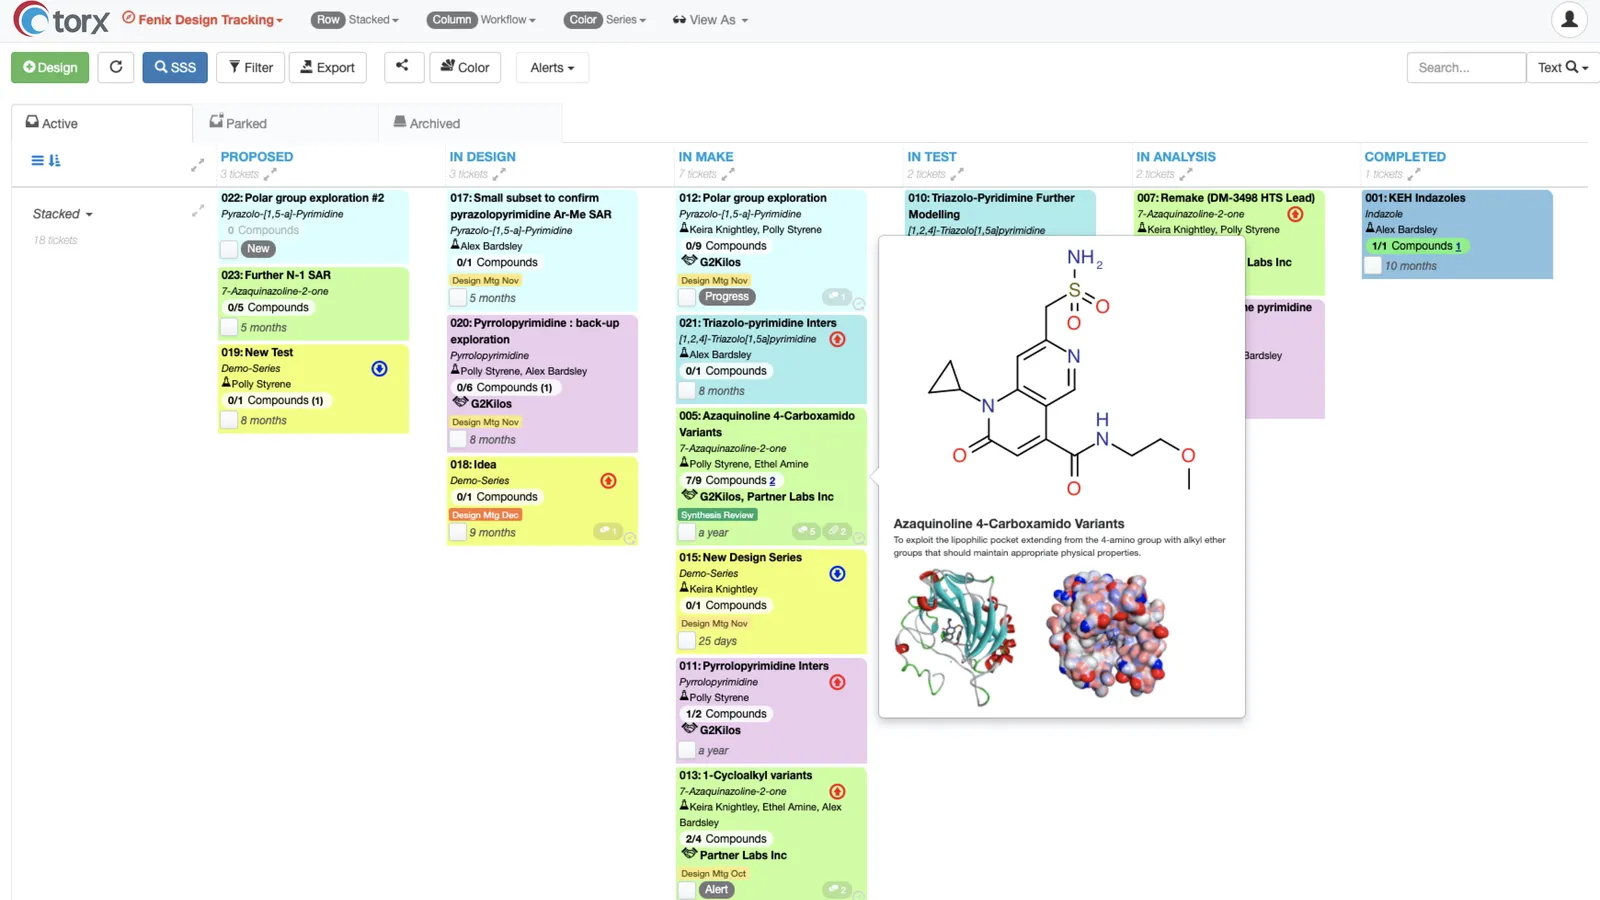 Capture all designs compounds and track their progress within the discovery cycle in real time